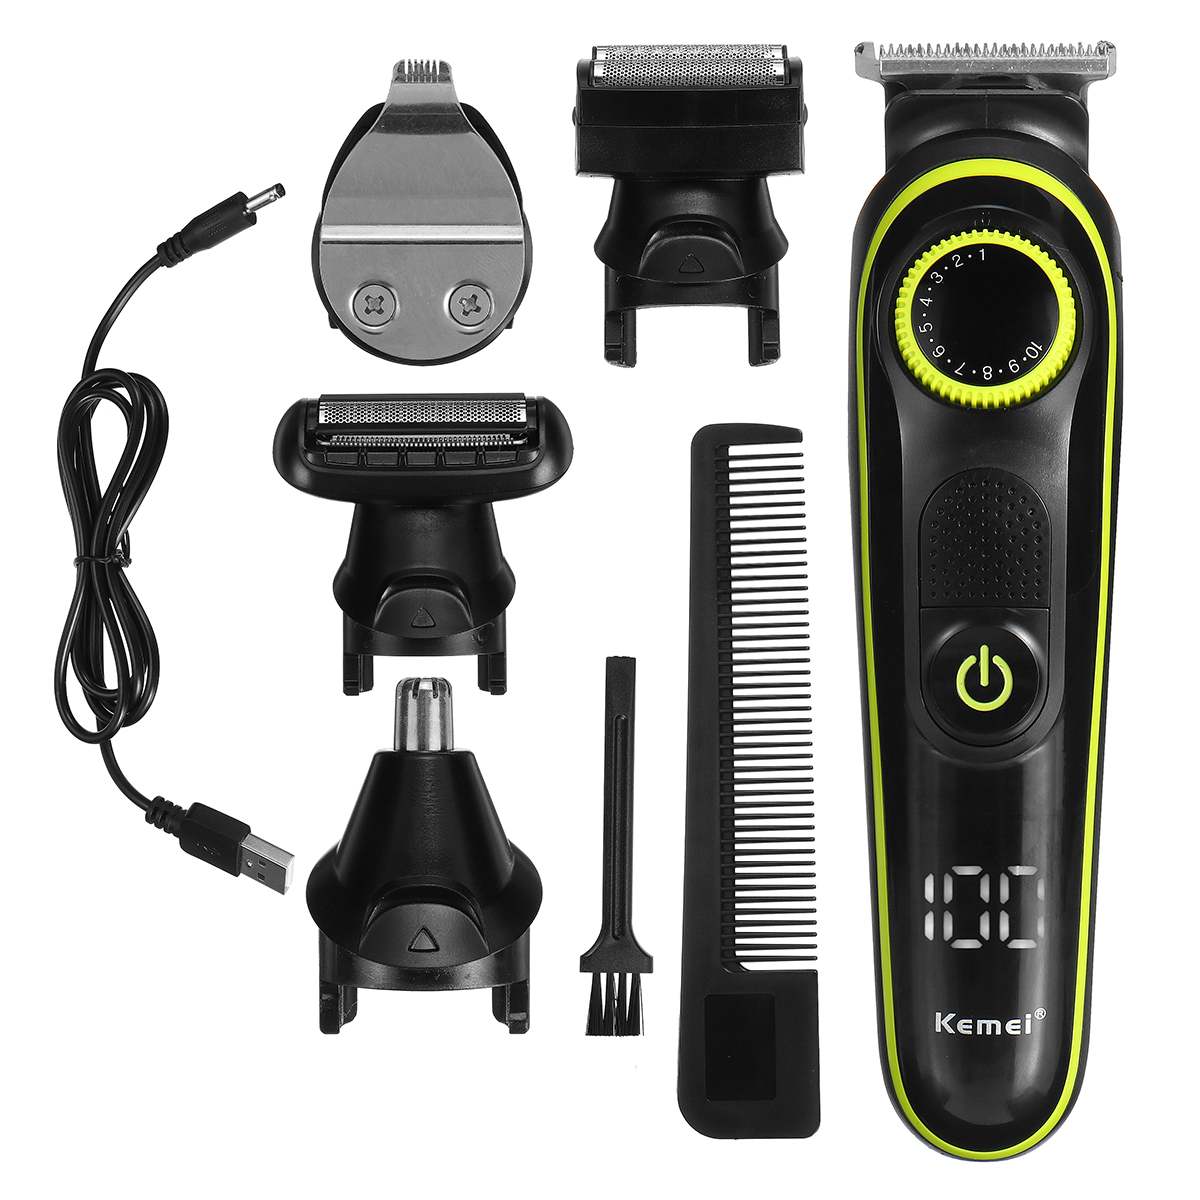 Electric Hair Trimmer Household Hair Clippers Multifunctional USB Rechargeable Shaver LED Display KM-696 5 in 1 Cutter Heads